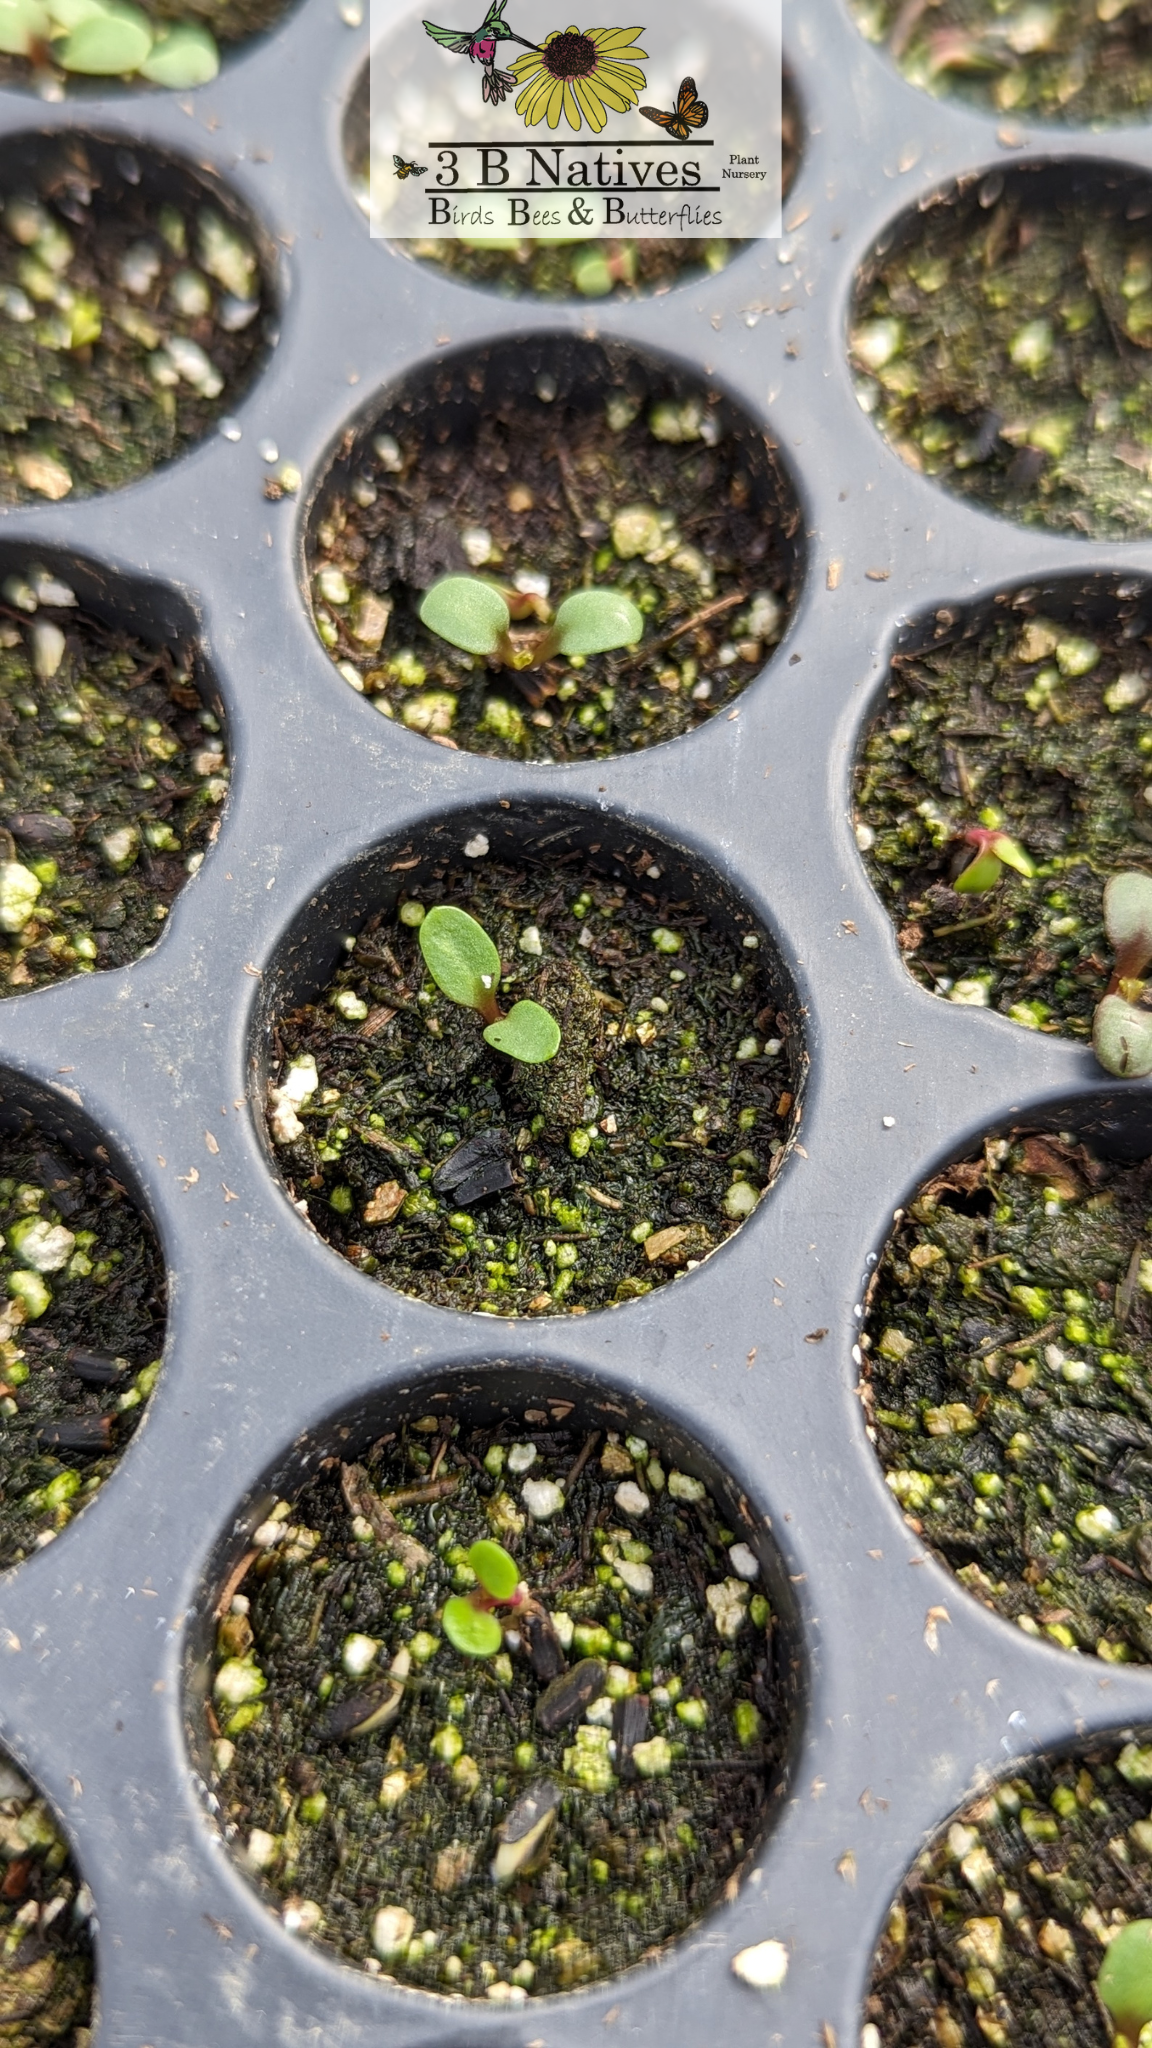 Heliopsis helianthoides - Early Sunflower Germinated Seedlings